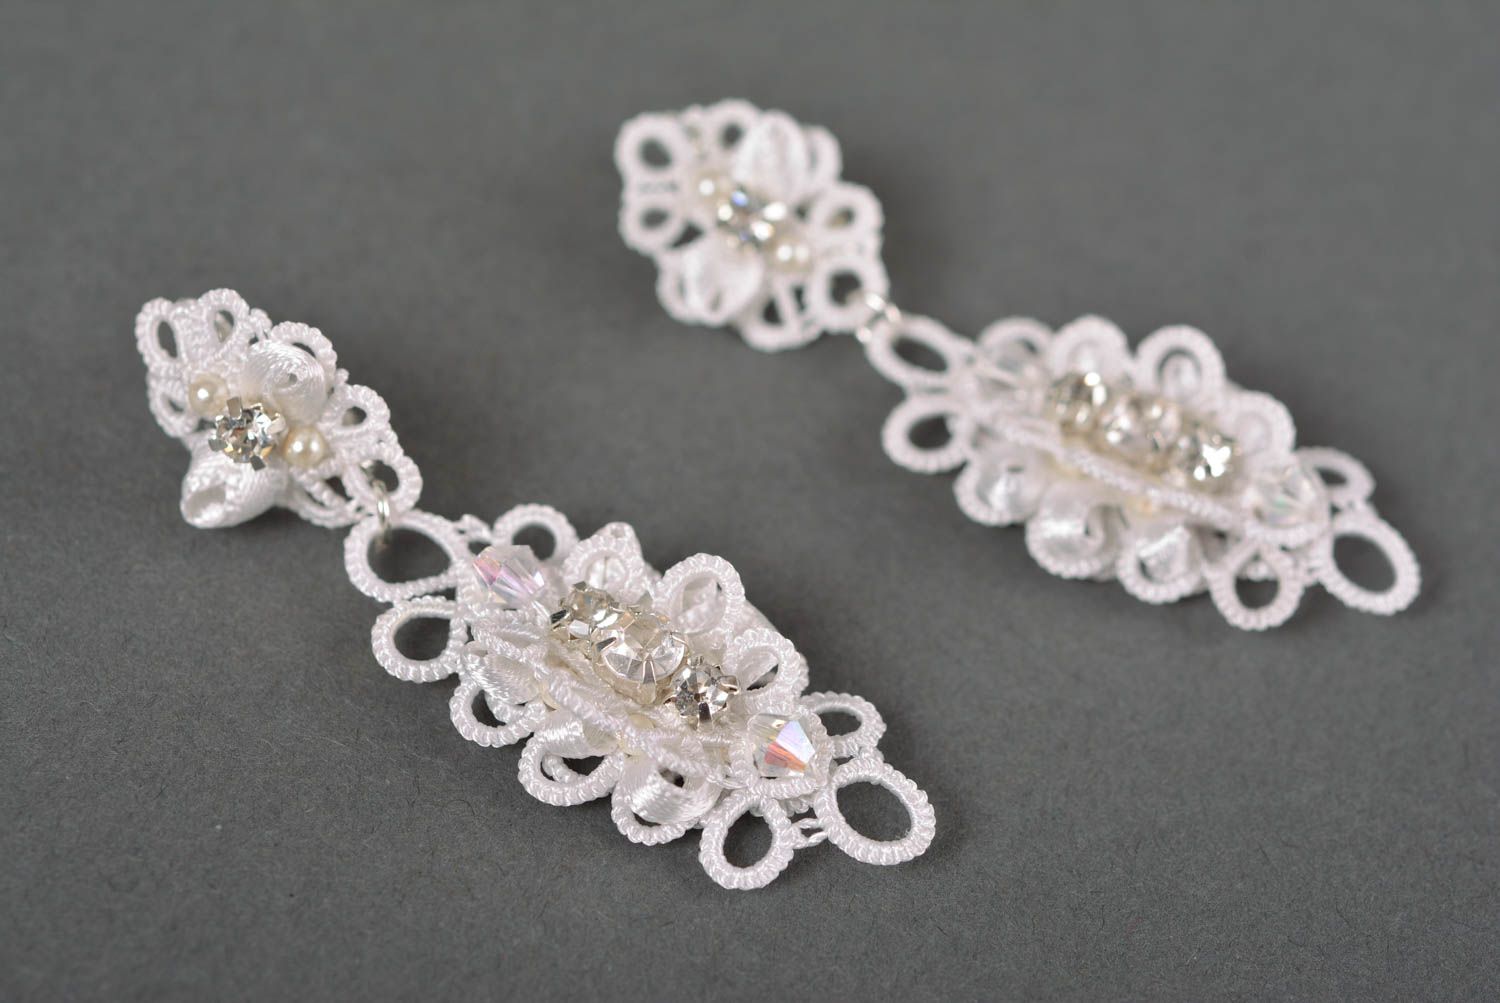 Long earrings homemade jewelry earrings designs tatting lace gift ideas for girl photo 1